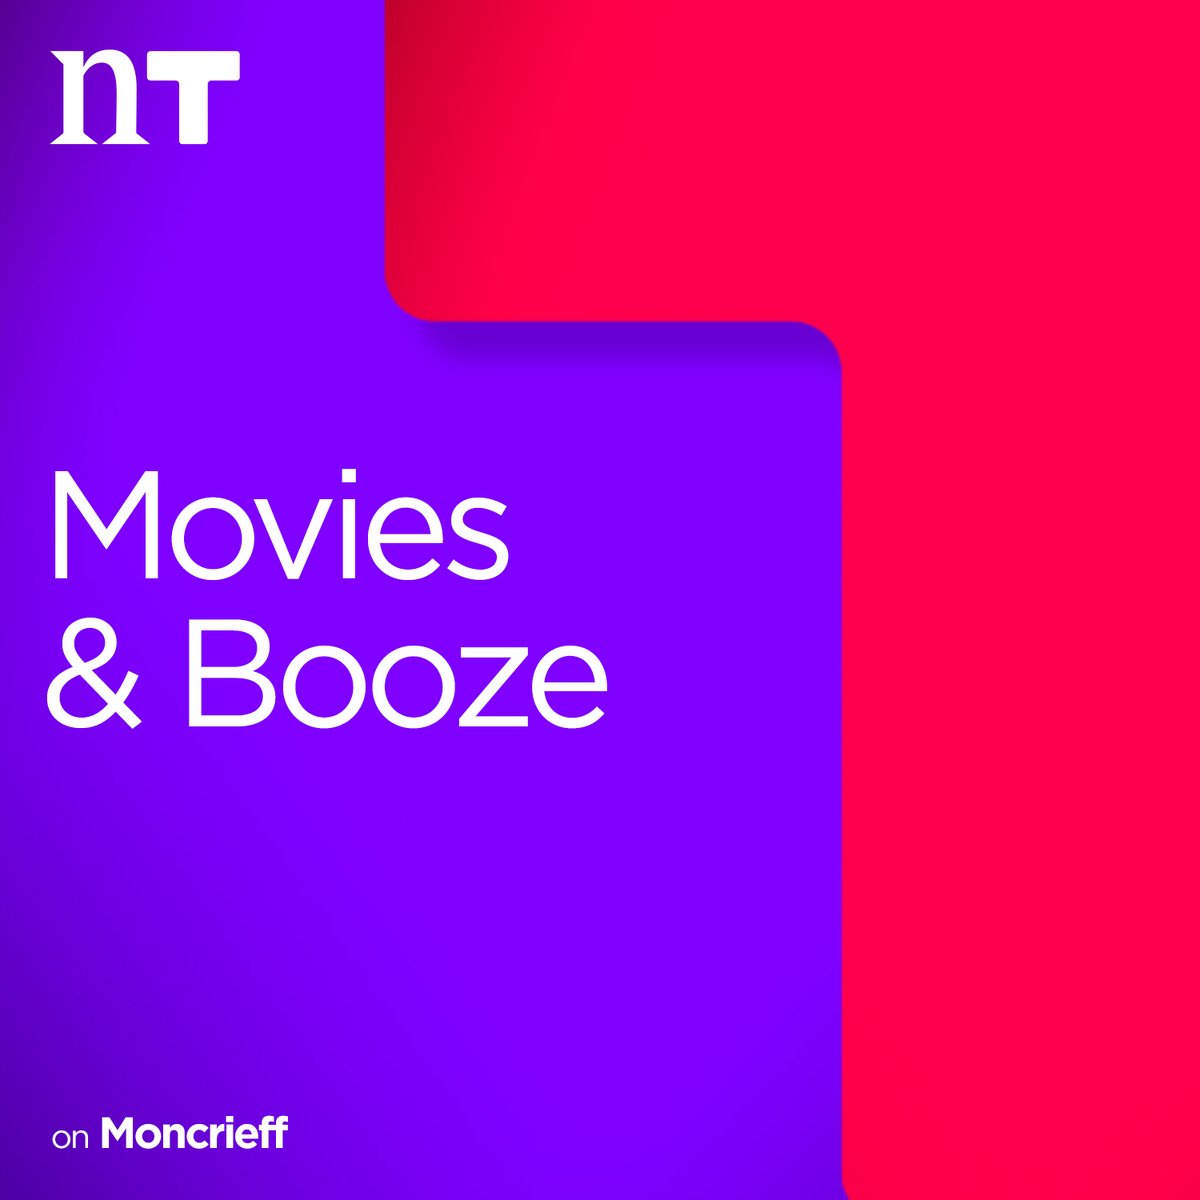 This week on Movies and Booze: We take a look at two very different films that gave @Toxicolly the same feeling 🎬 To find out more, join @SeanMoncrieff from 3pm, with thanks to @mandsireland 🍾